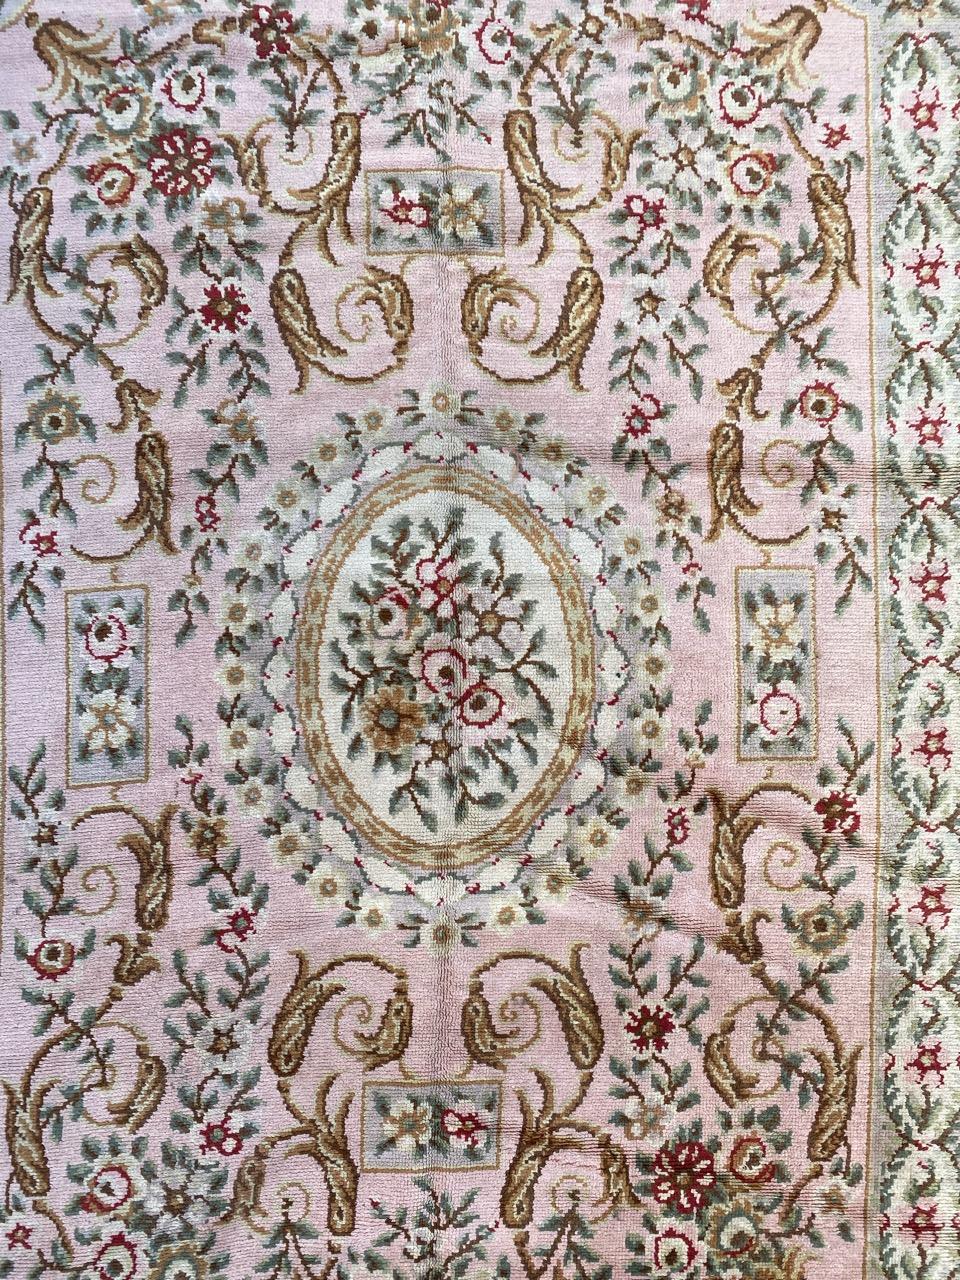 Nice early 20th century french Aubusson rug with beautiful floral savonnerie design and pretty colors, entirely knotted with wool velvet on cotton and jute foundation.

✨✨✨
